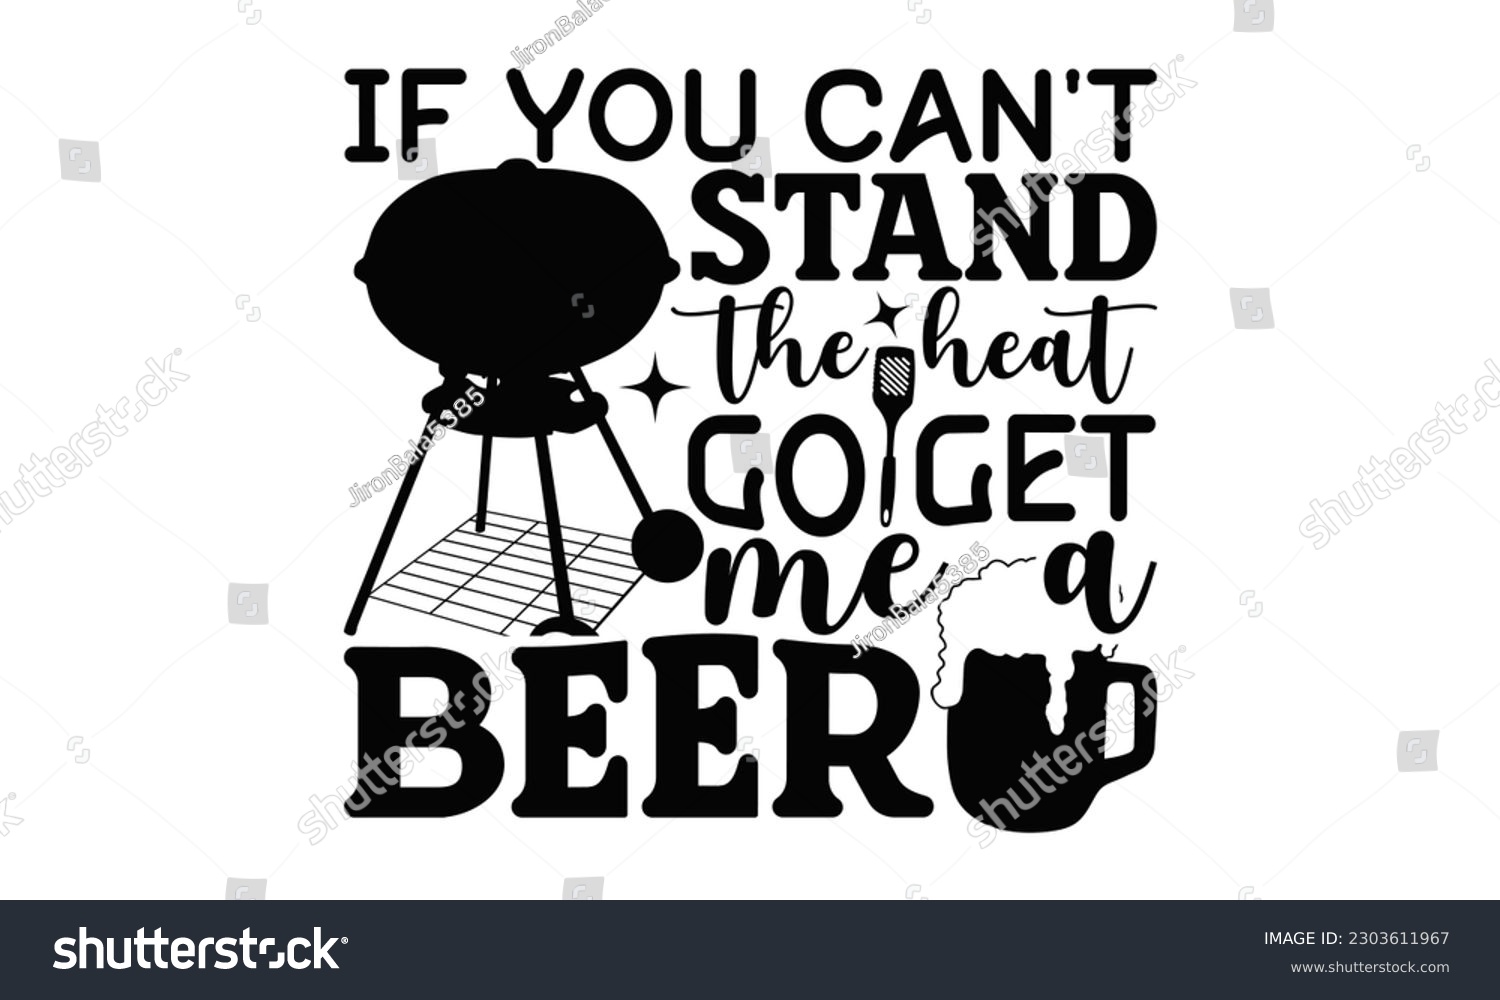 SVG of If You Can't Stand The Heat Go Get Me A Beer - Barbecue SVG Design, Hand drawn vintage illustration with hand-lettering and decoration elements with, SVG Files for Cutting.
 svg